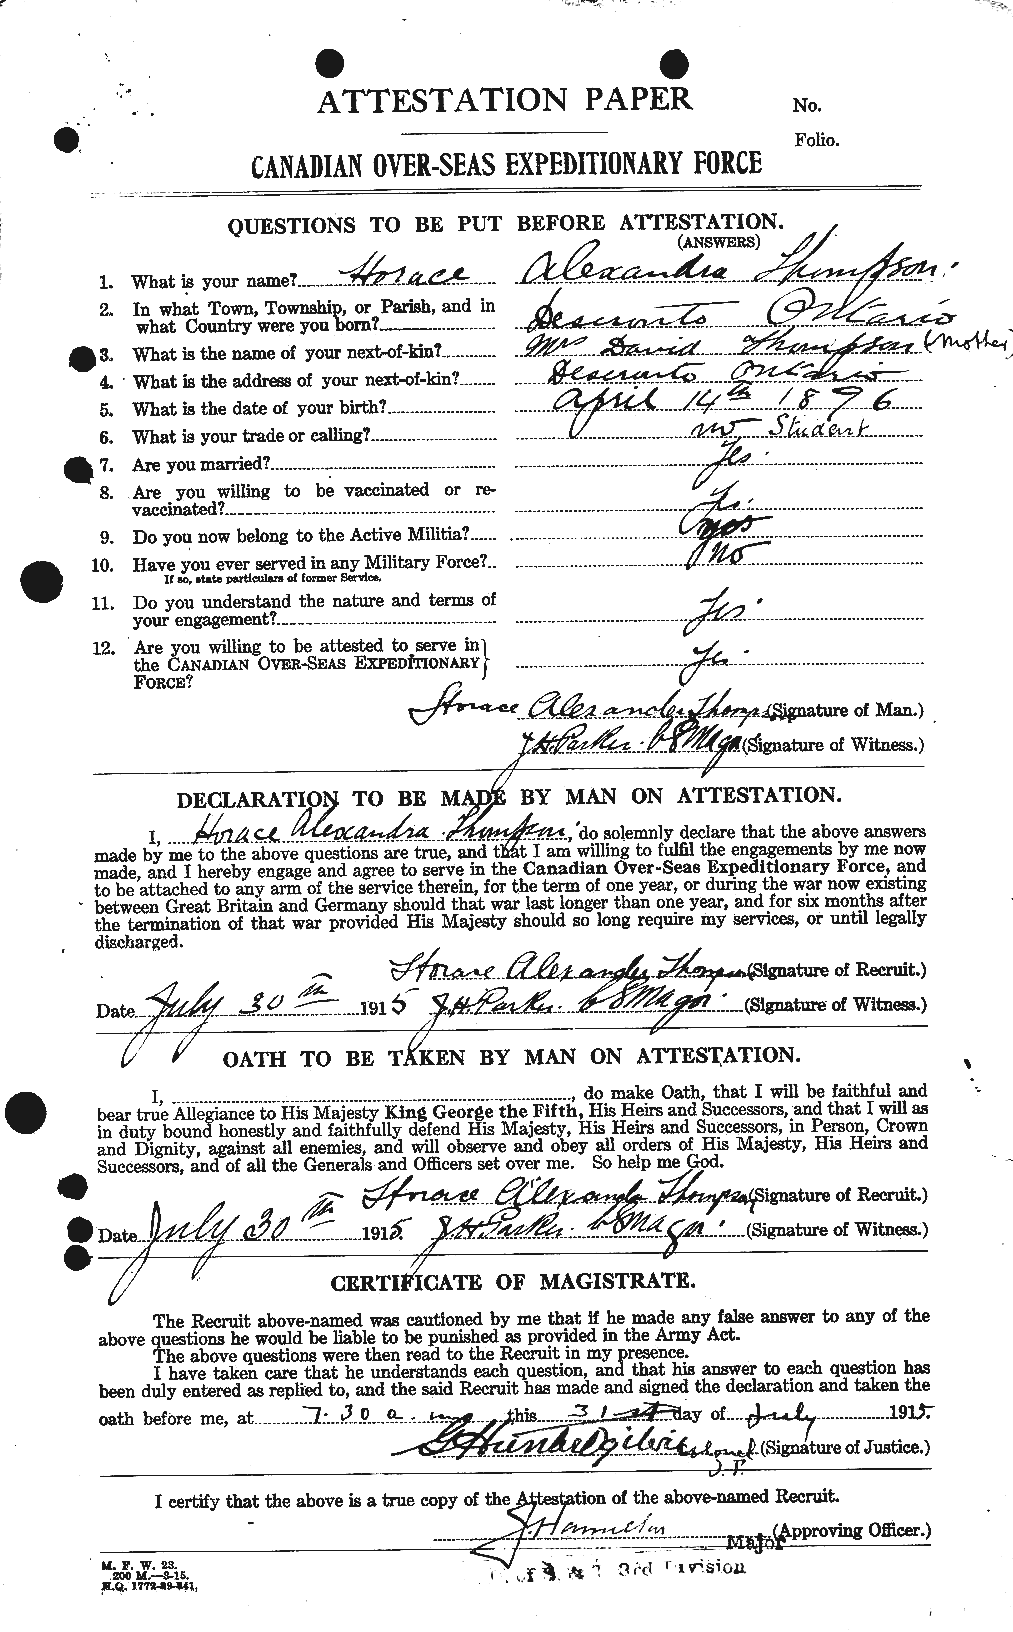 Personnel Records of the First World War - CEF 633967a